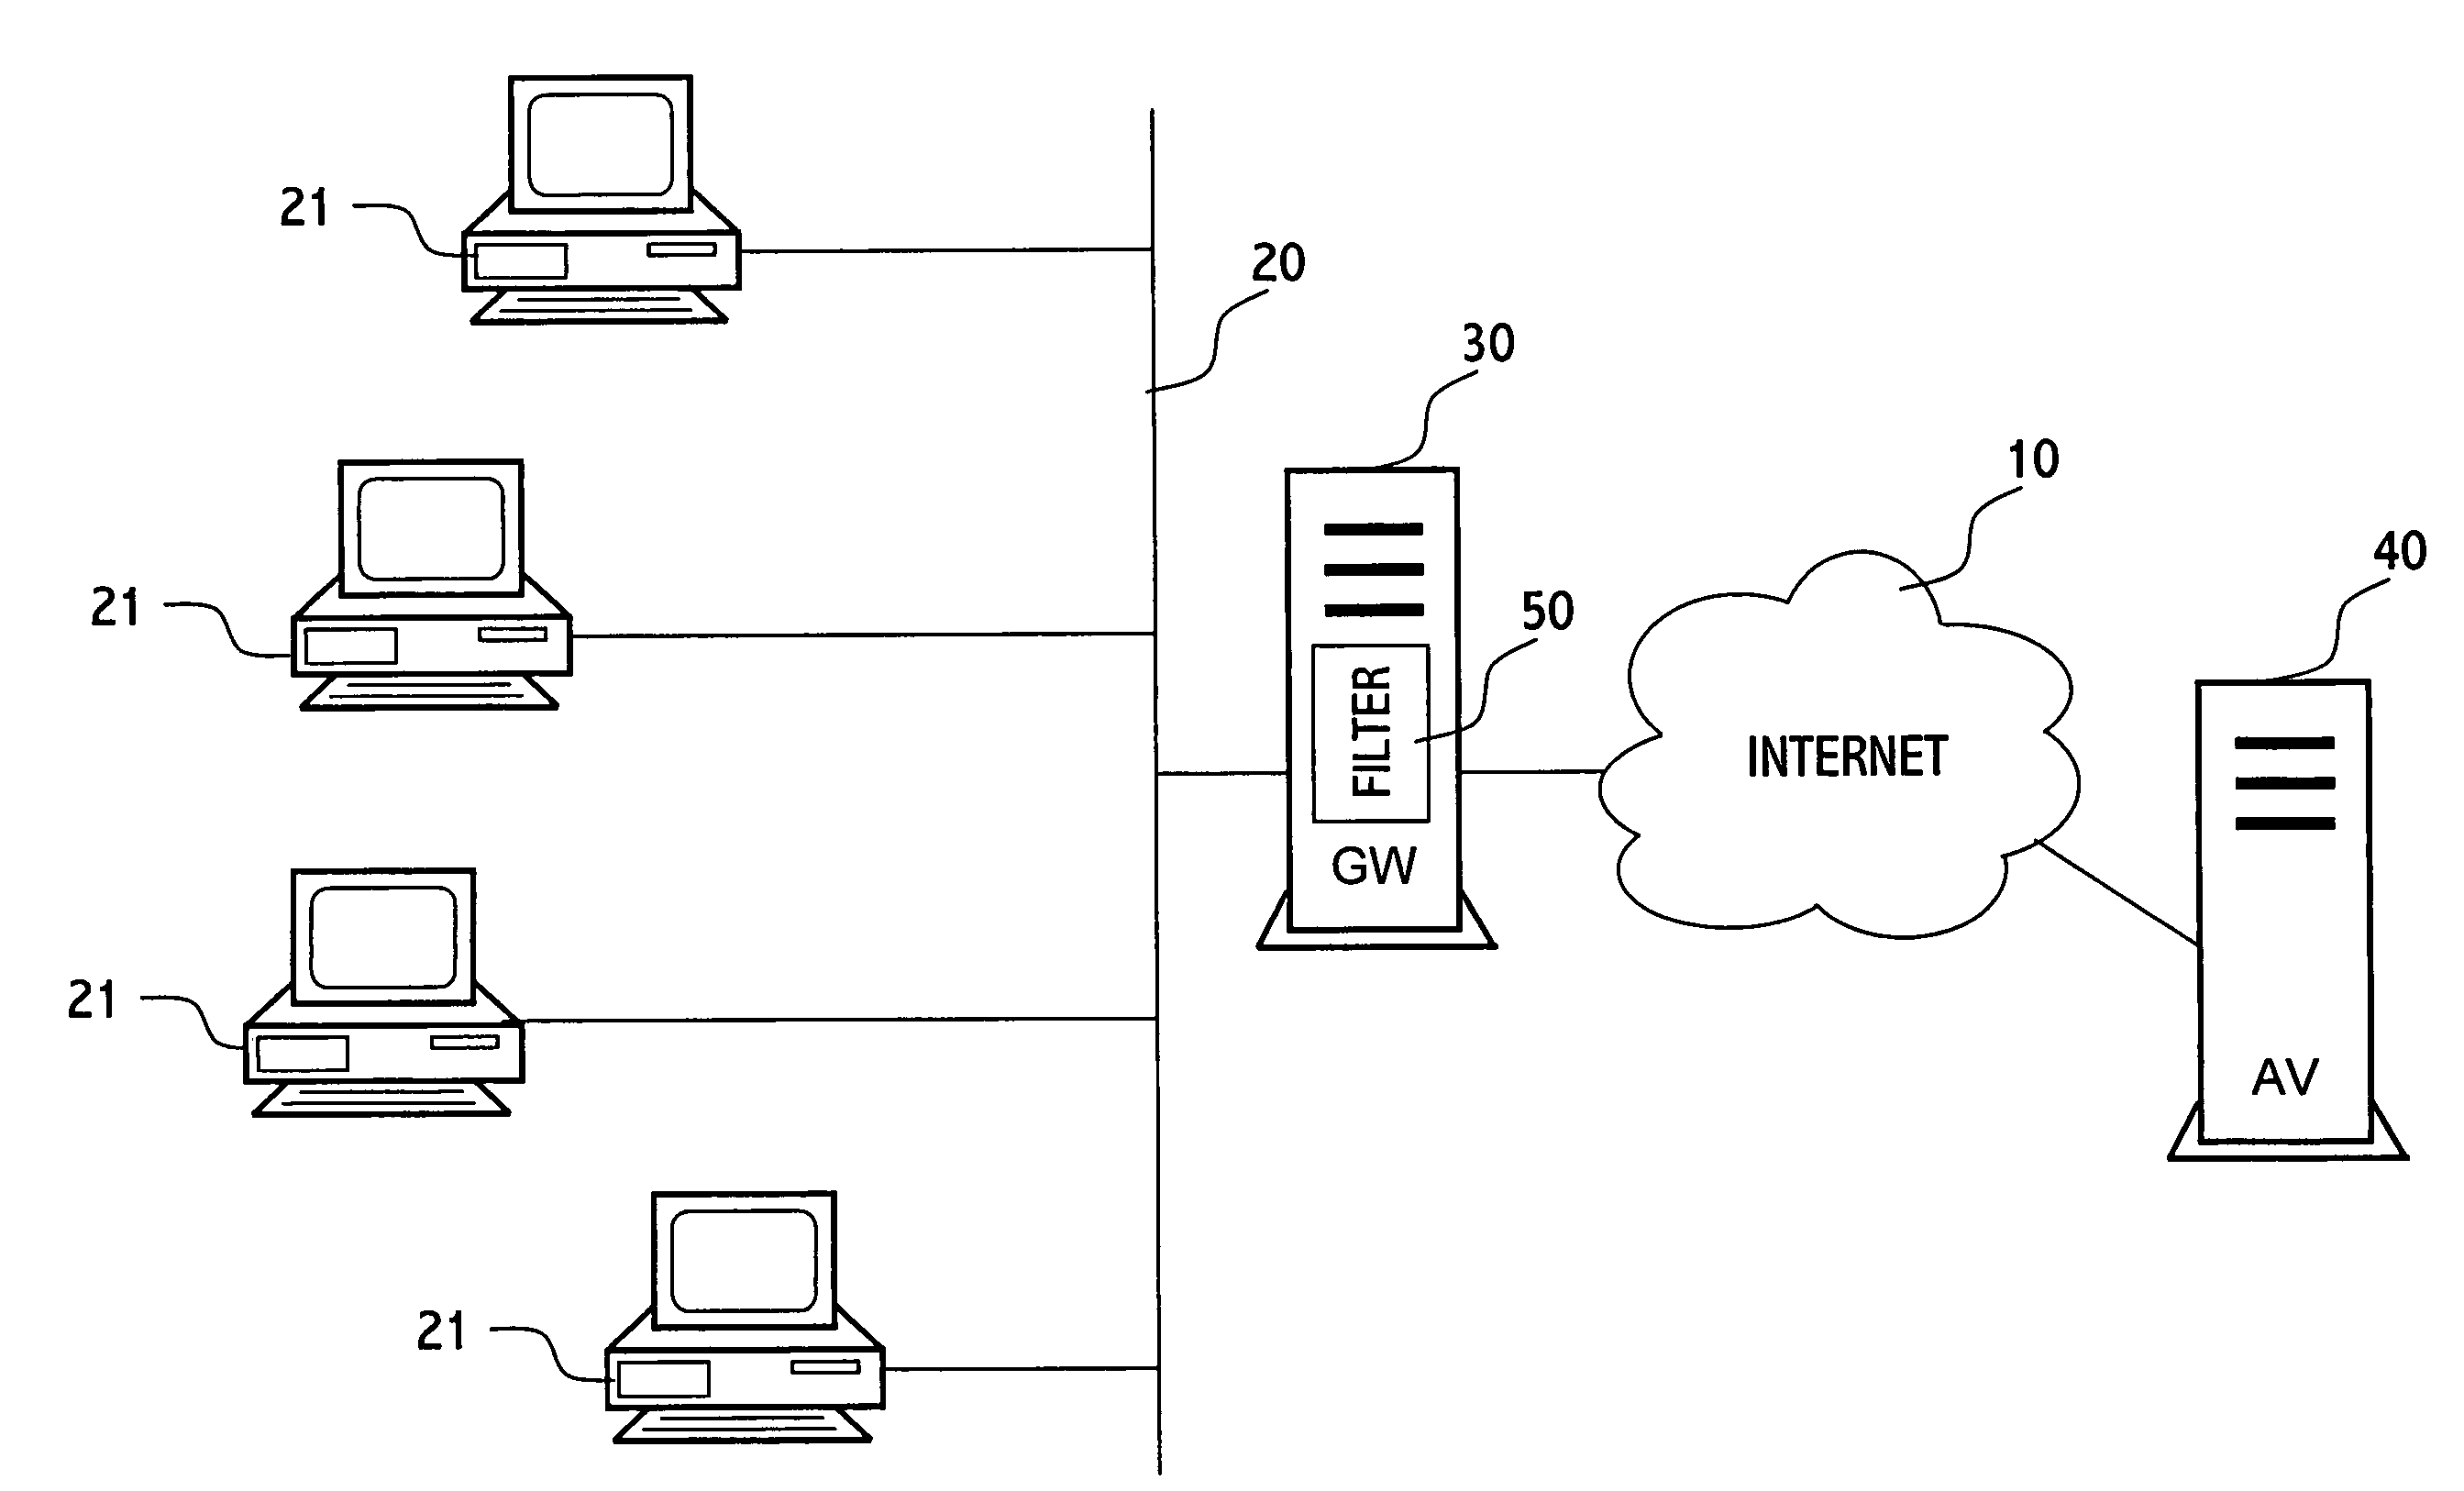 Method for protecting a computer from suspicious objects